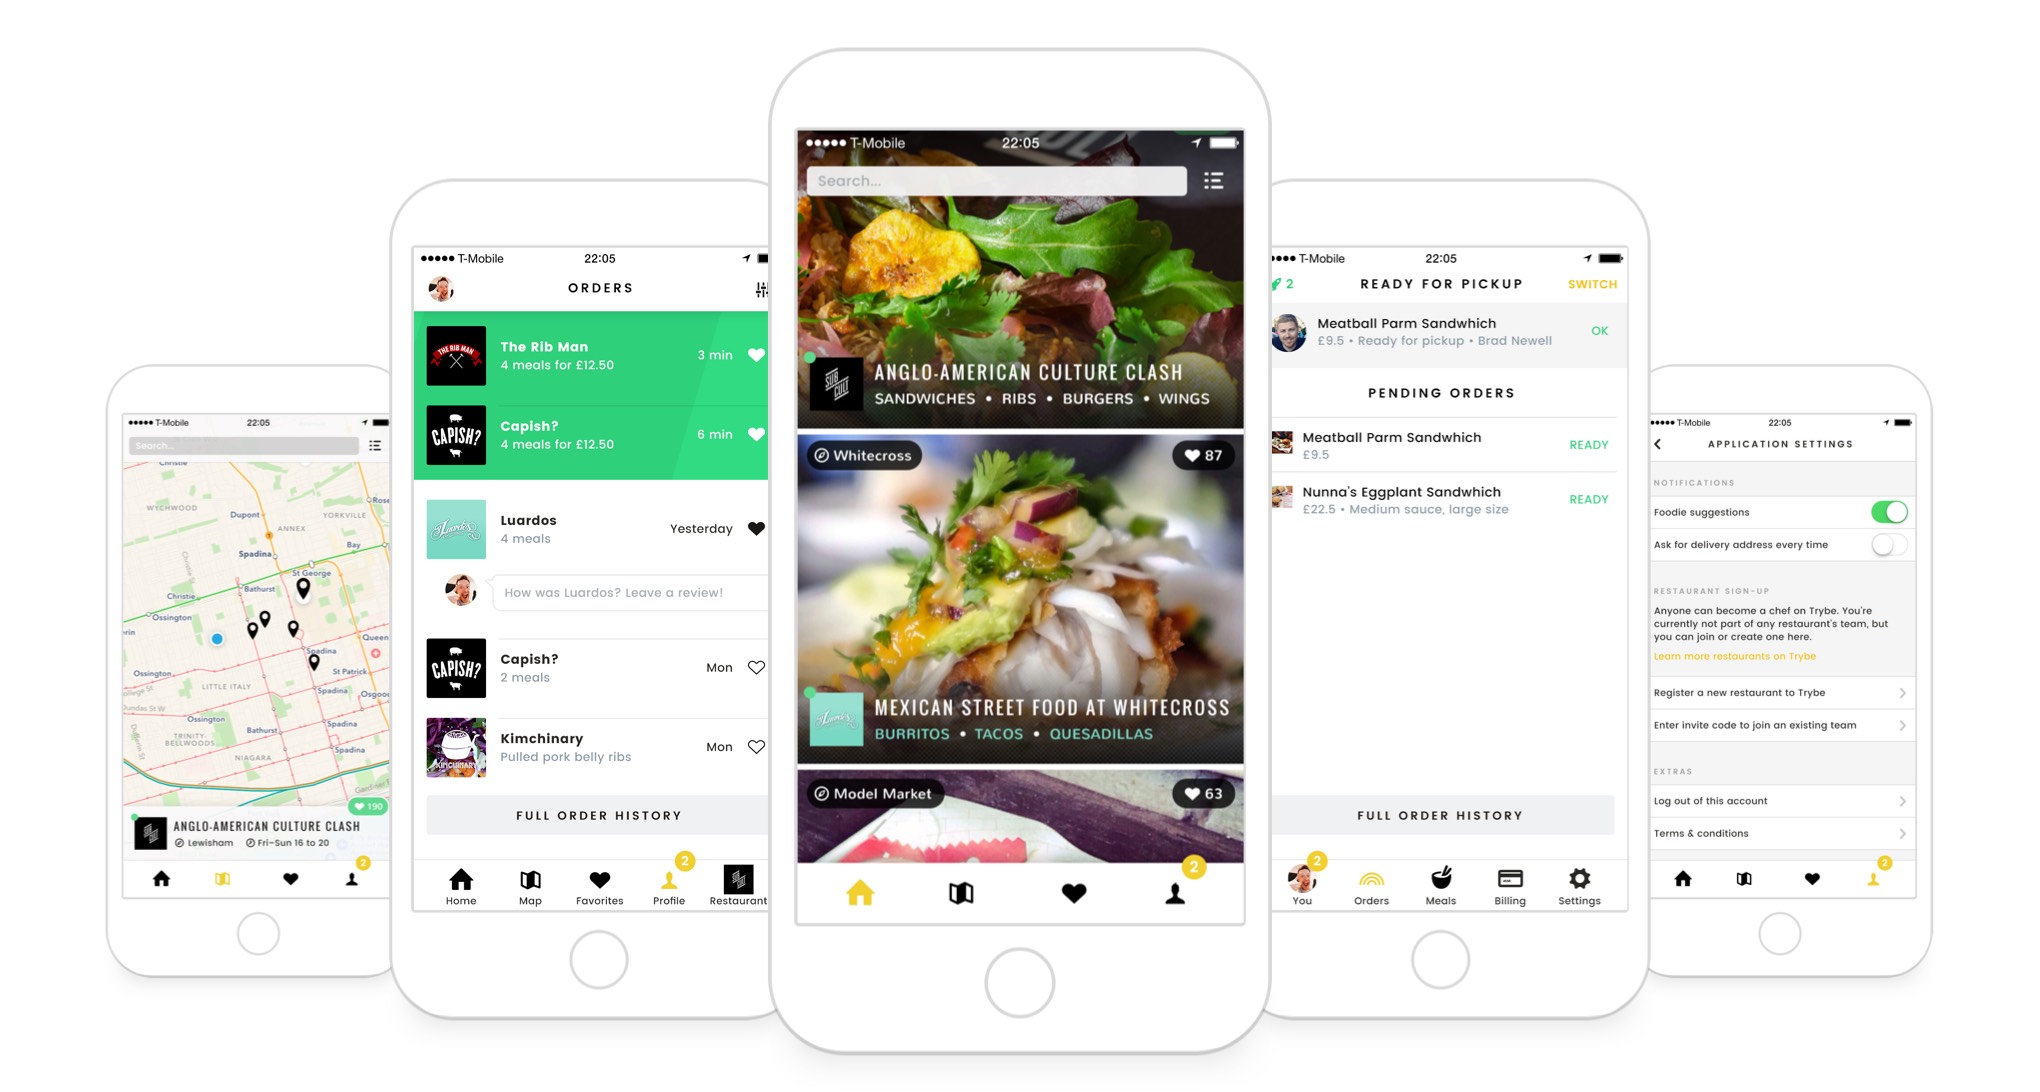 Trybe app's original UI for finding home cooks and following street food vendors.